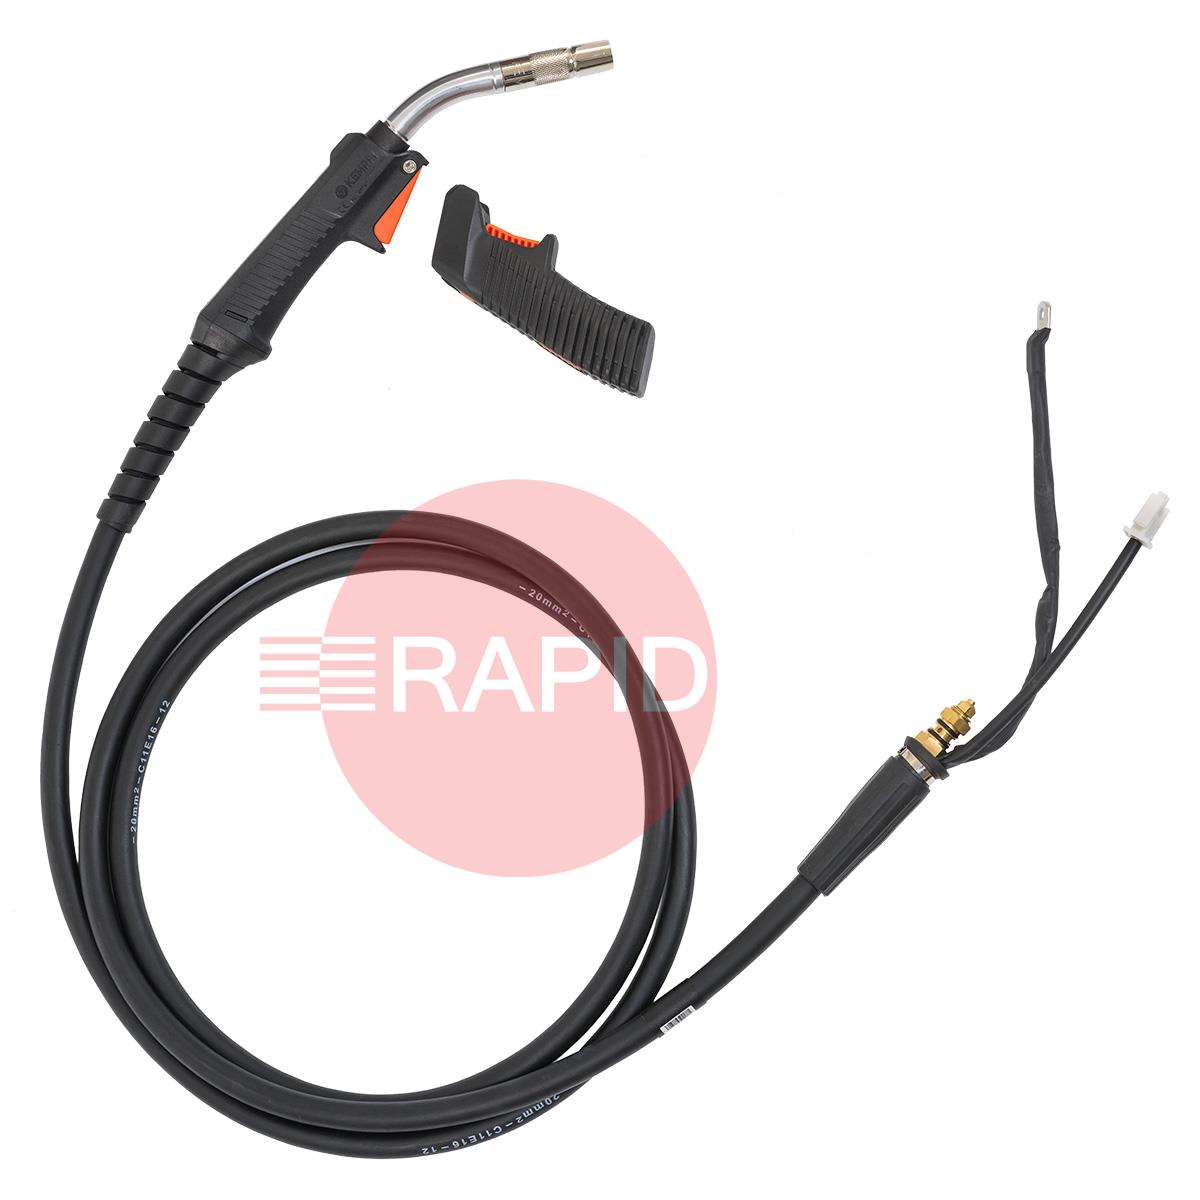 61008220  Kemppi MinarcMig 220 Auto MIG Package, 230v CE. Includes GC 223G MIG Torch, Earth & Gas Hose